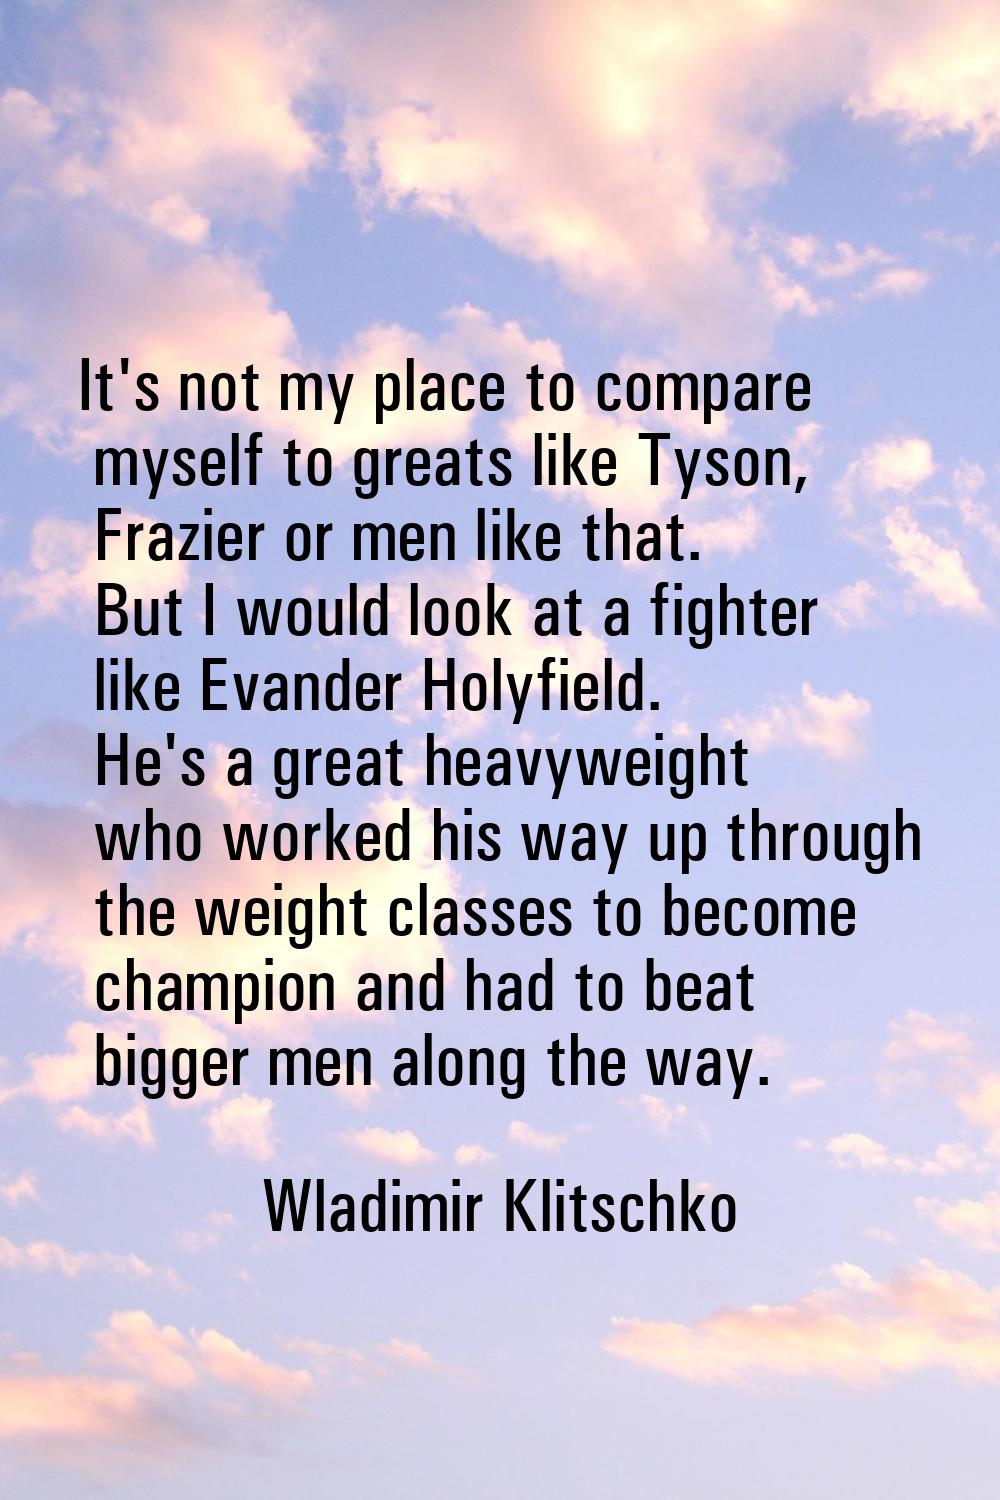 It's not my place to compare myself to greats like Tyson, Frazier or men like that. But I would loo